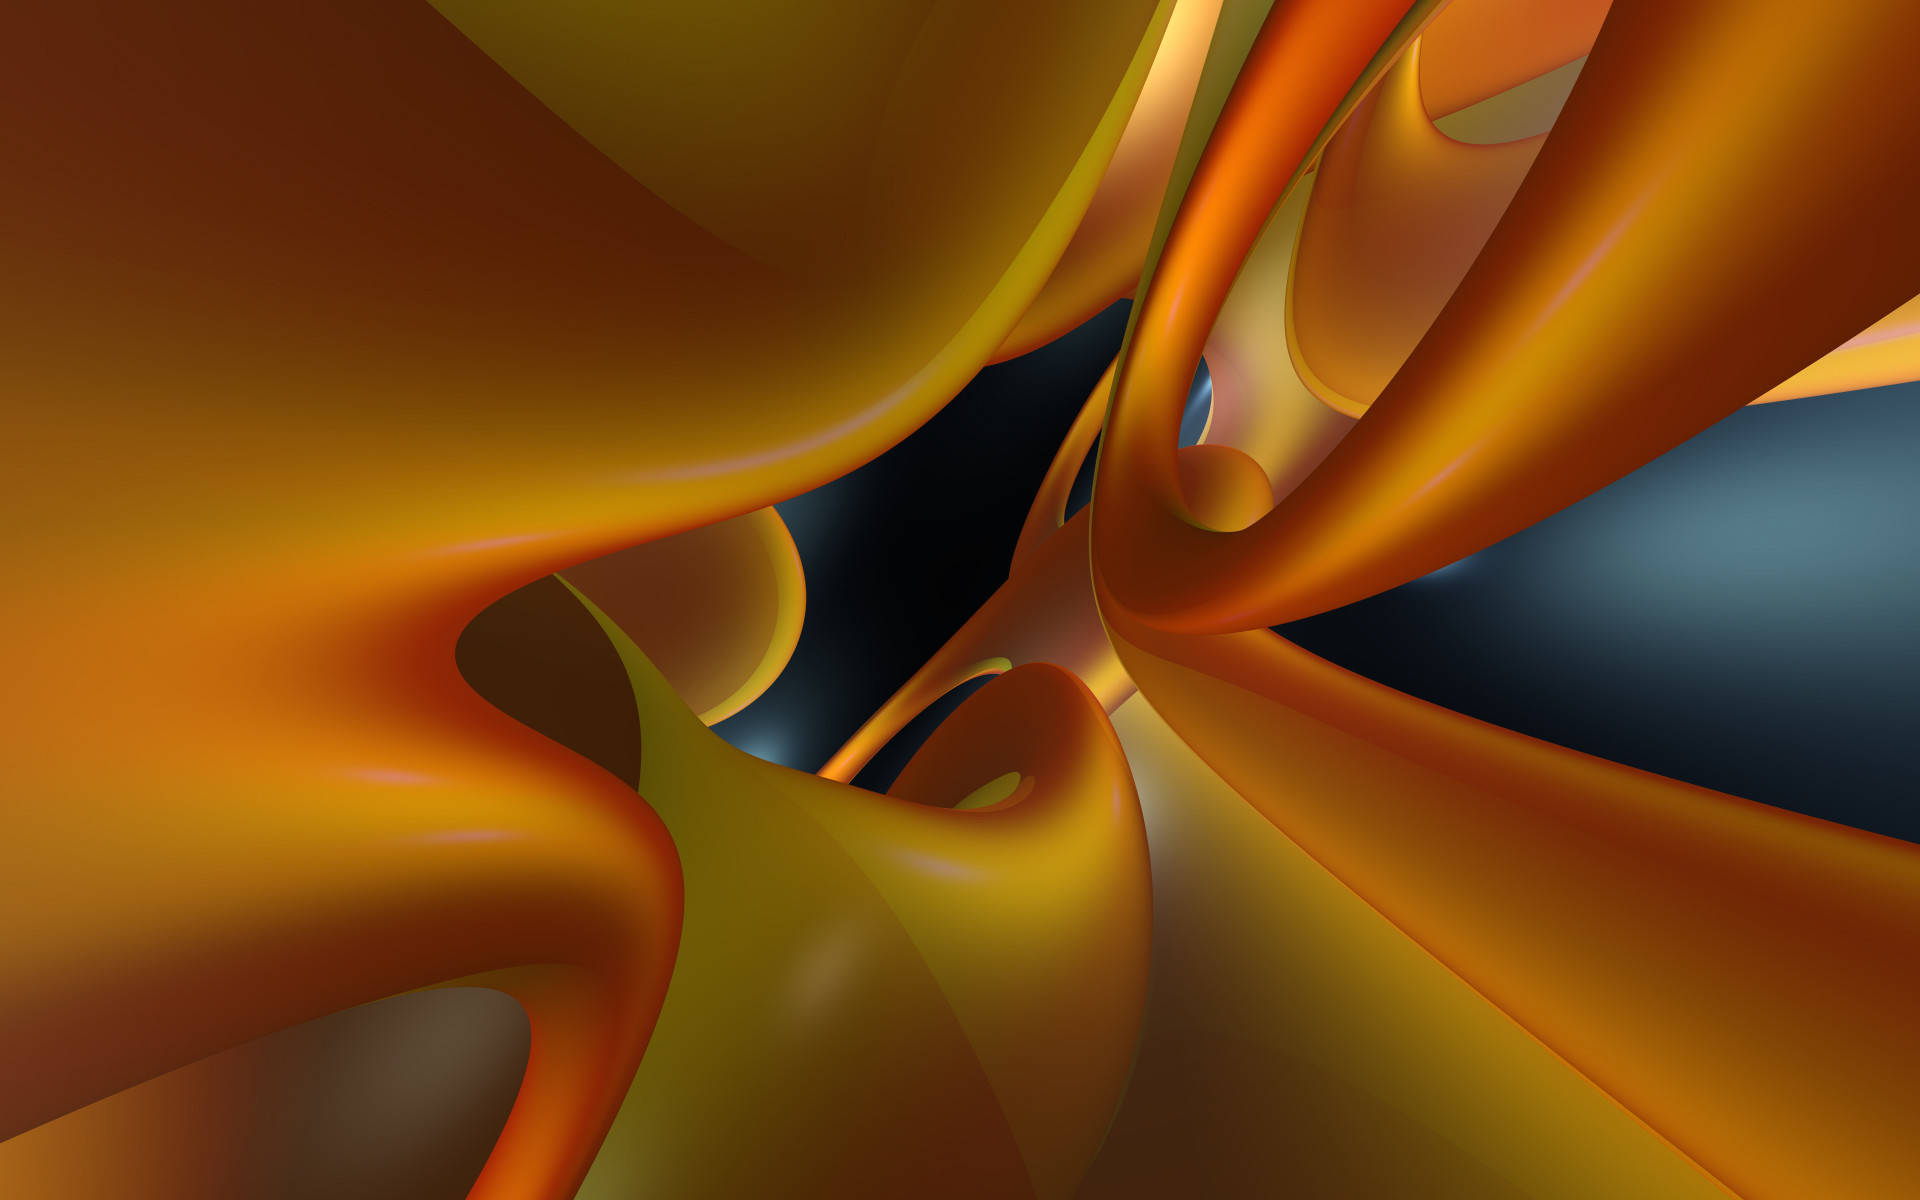 Abstract Hd Design Orange And Yellow Wallpaper